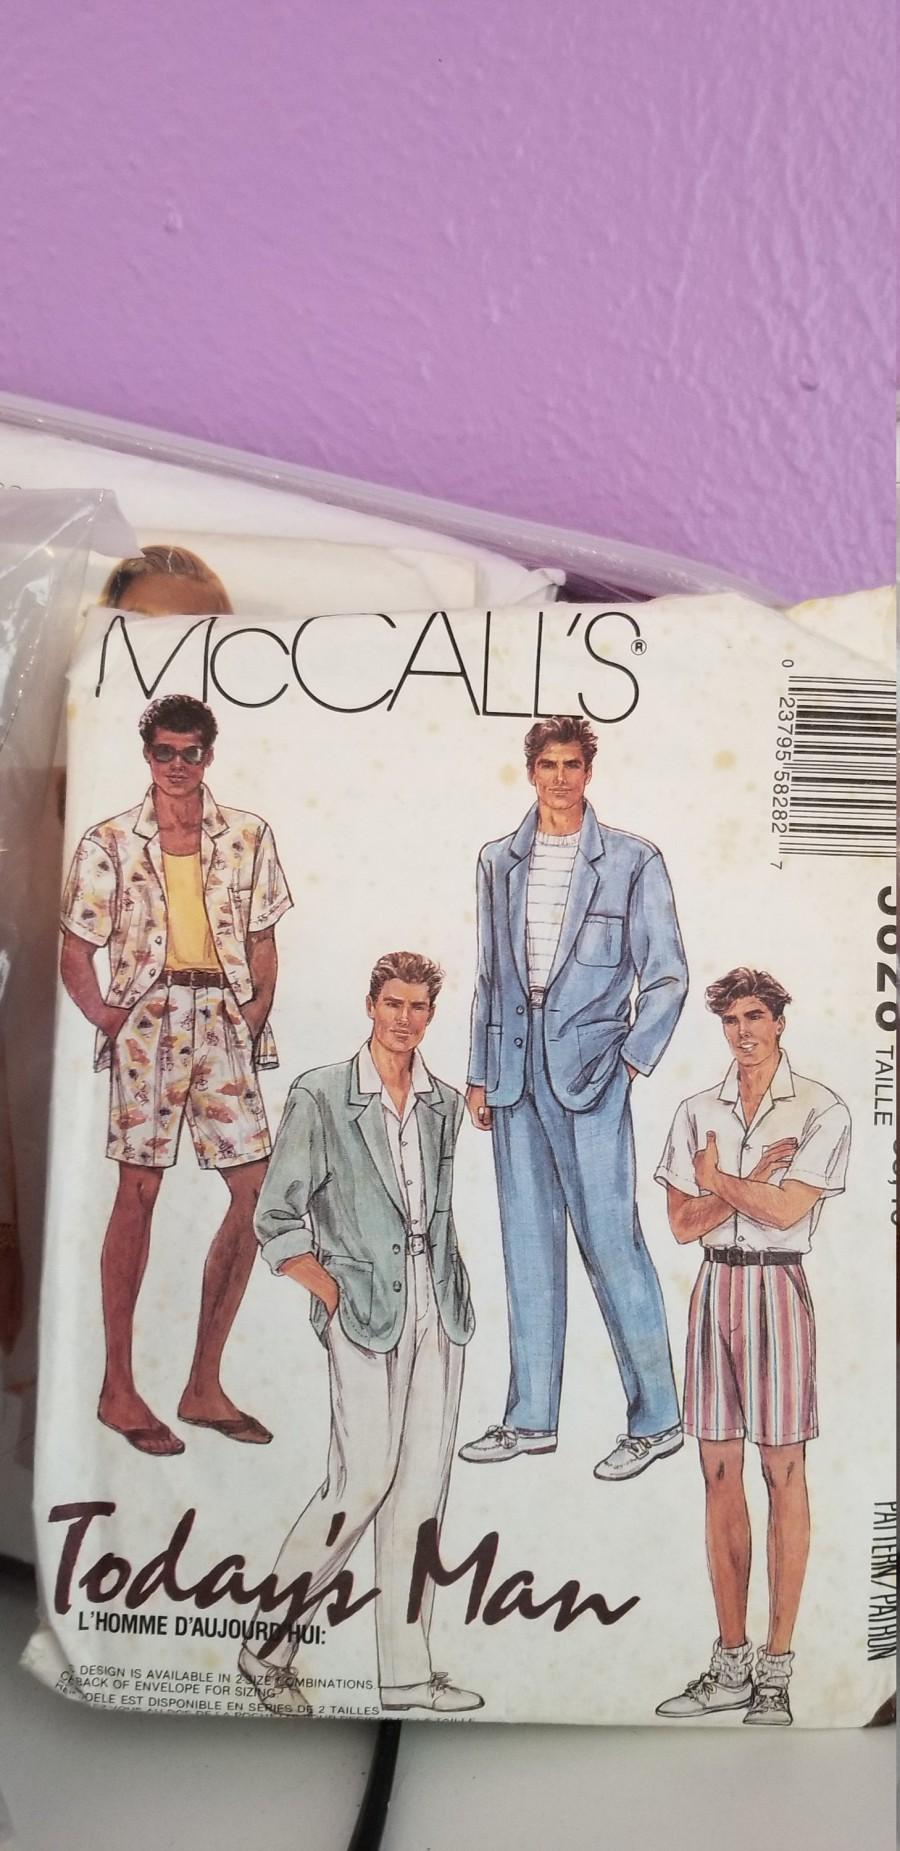 Свадьба - McCalls mens unlined jacket shirt and pants or shorts sizes 38 to 40 some precut pieces